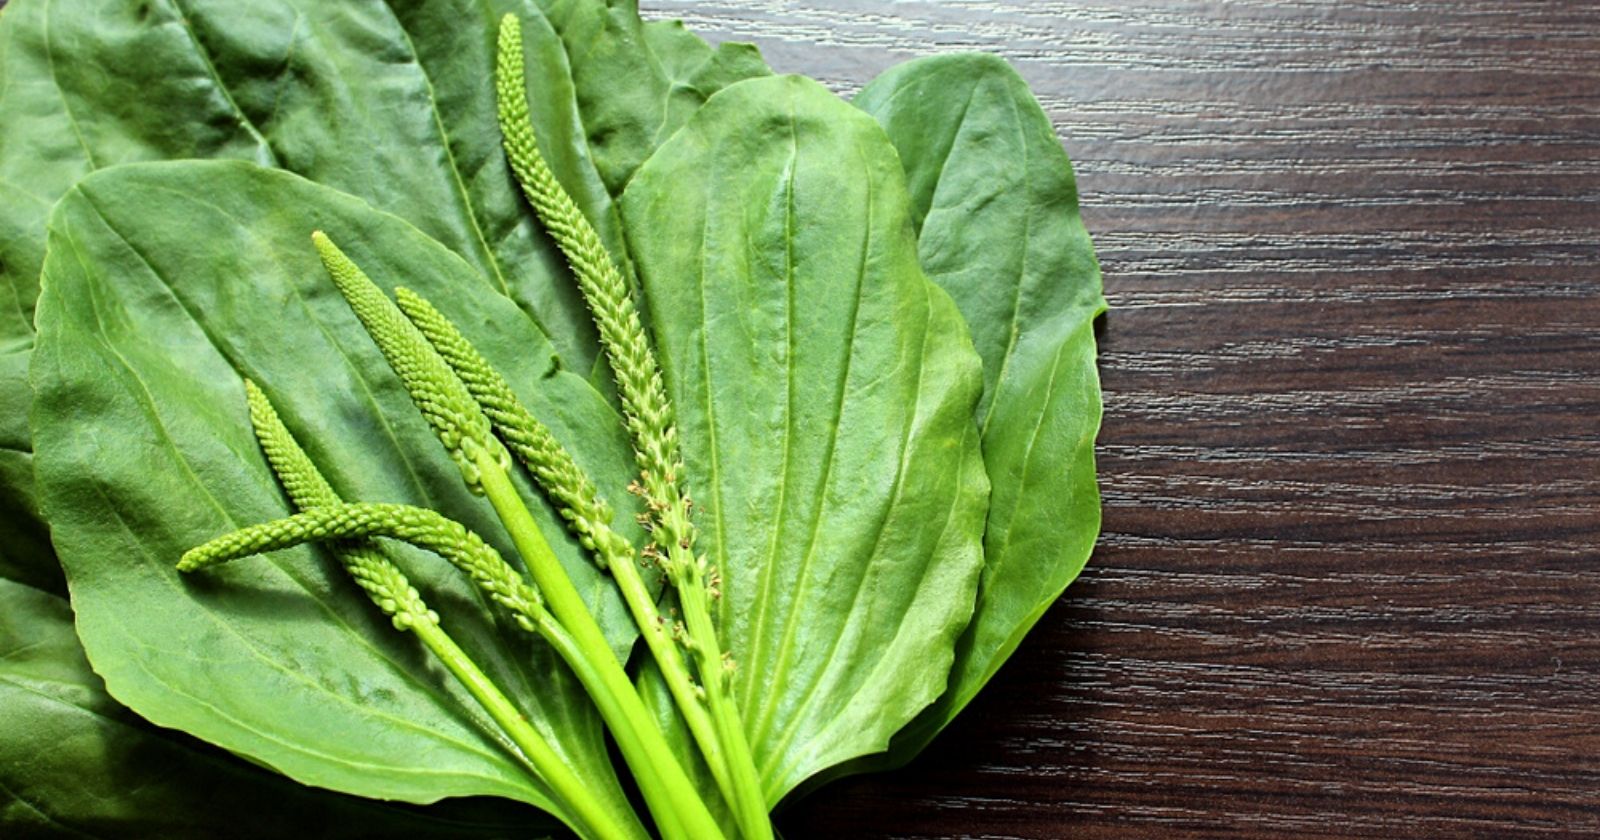 Plantain: 3 unexpected benefits of this unloved plant